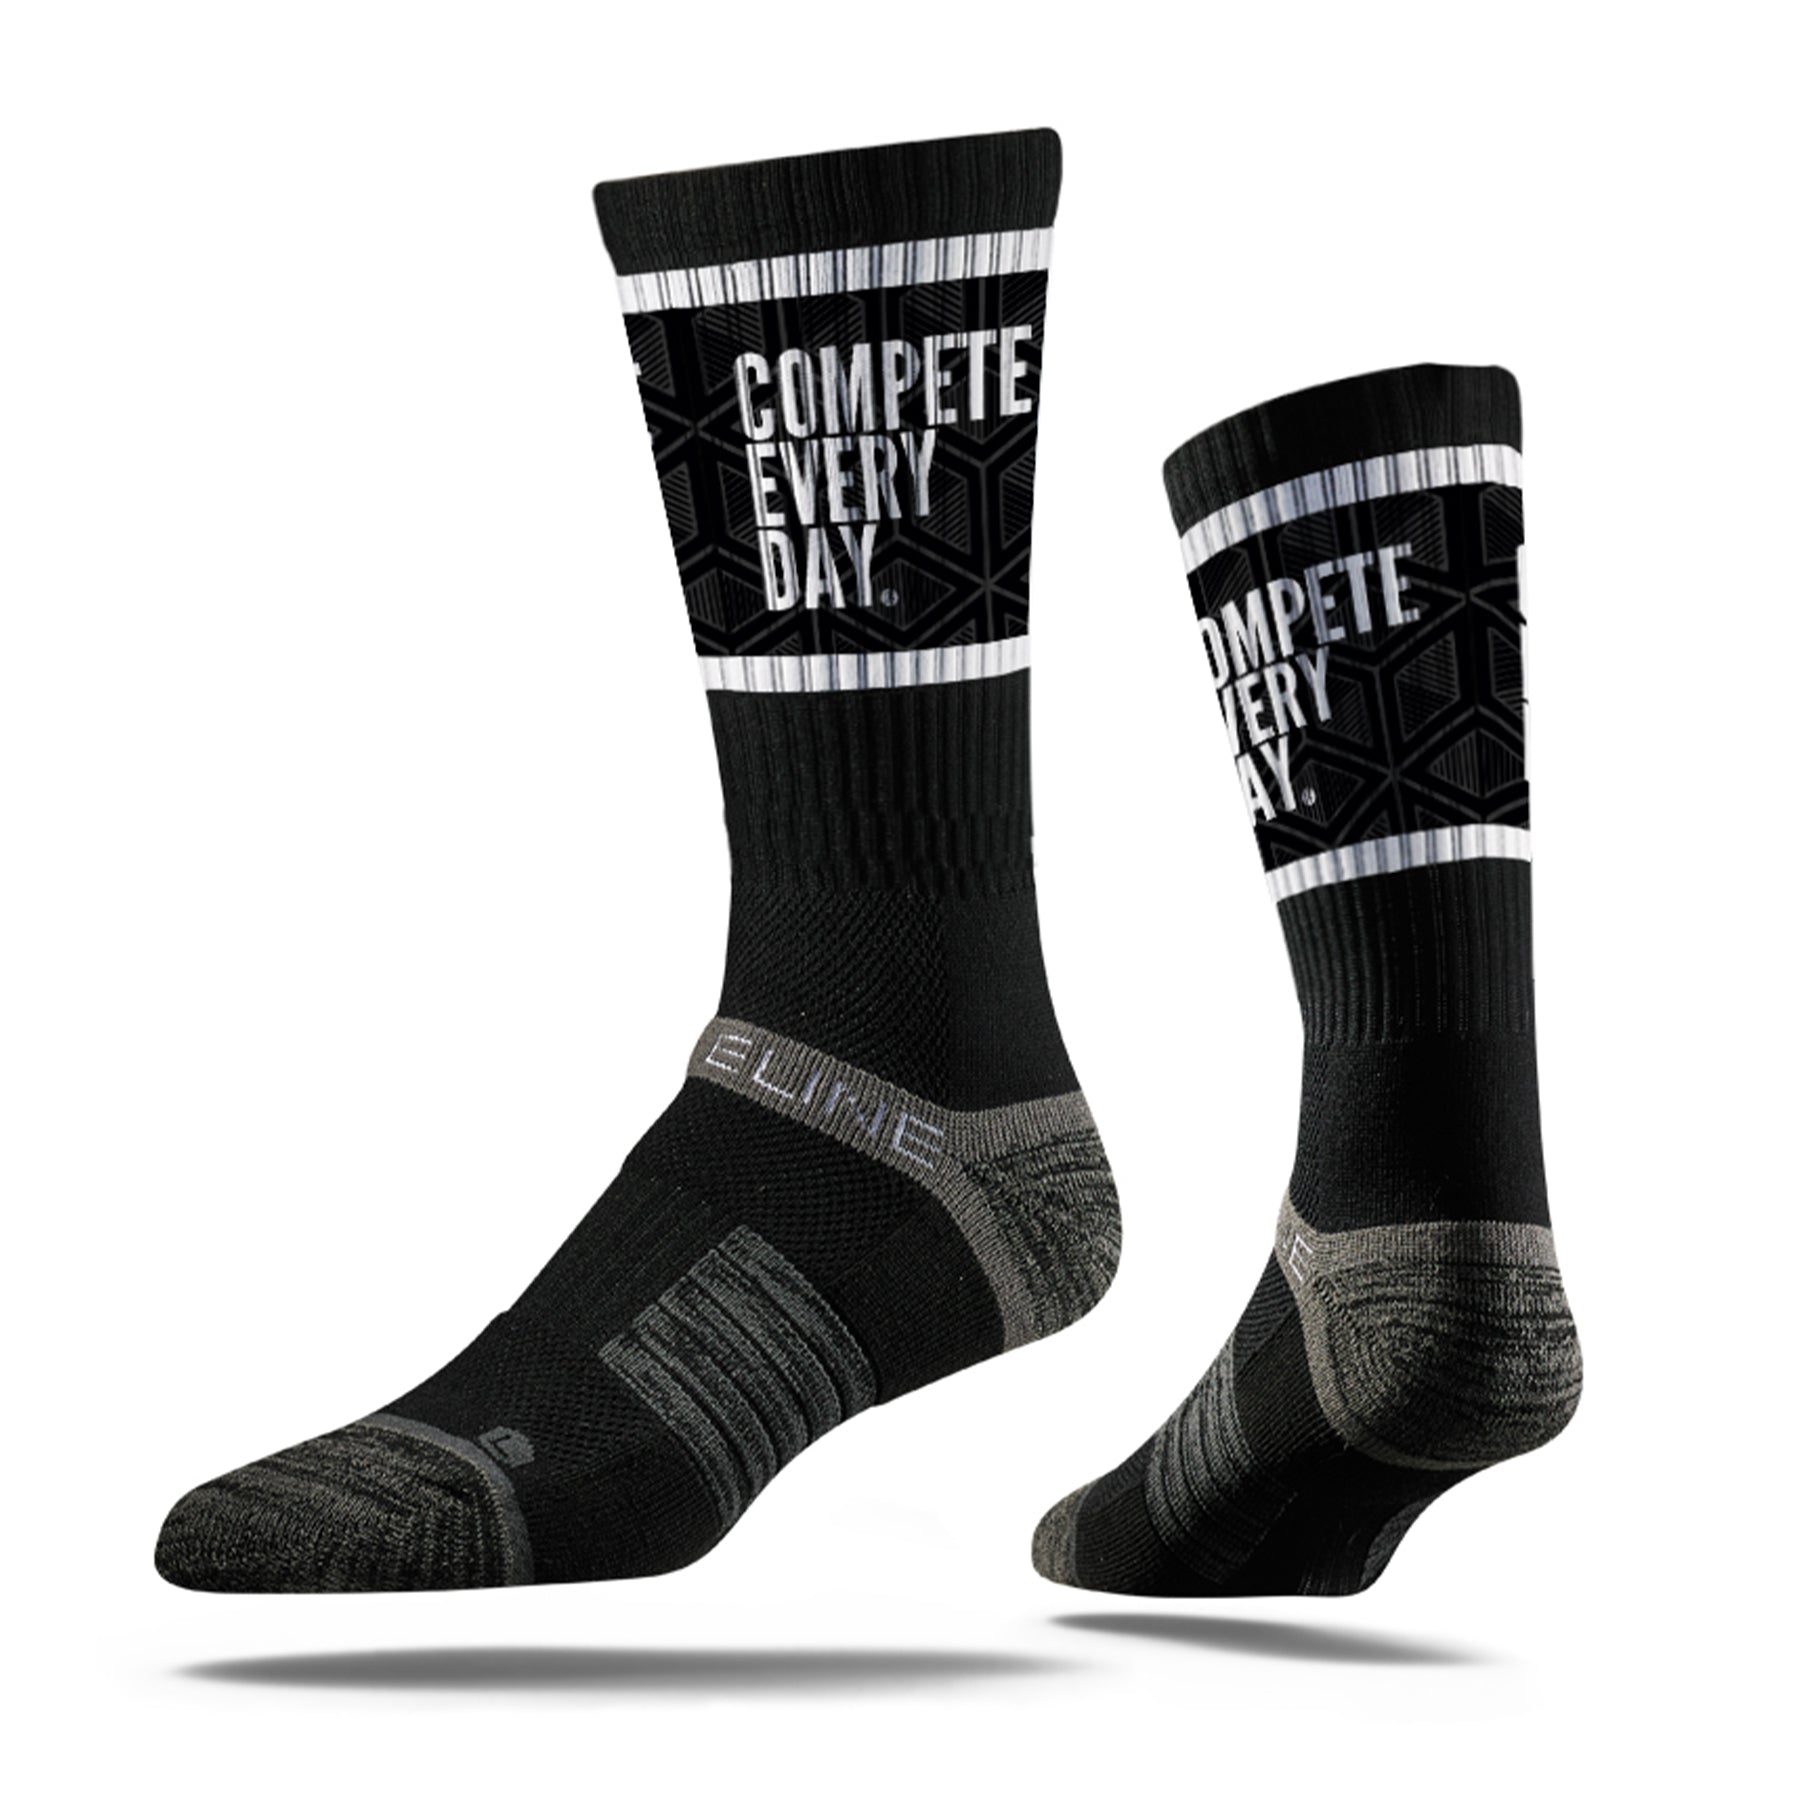 Classic Compete Every Day black socks